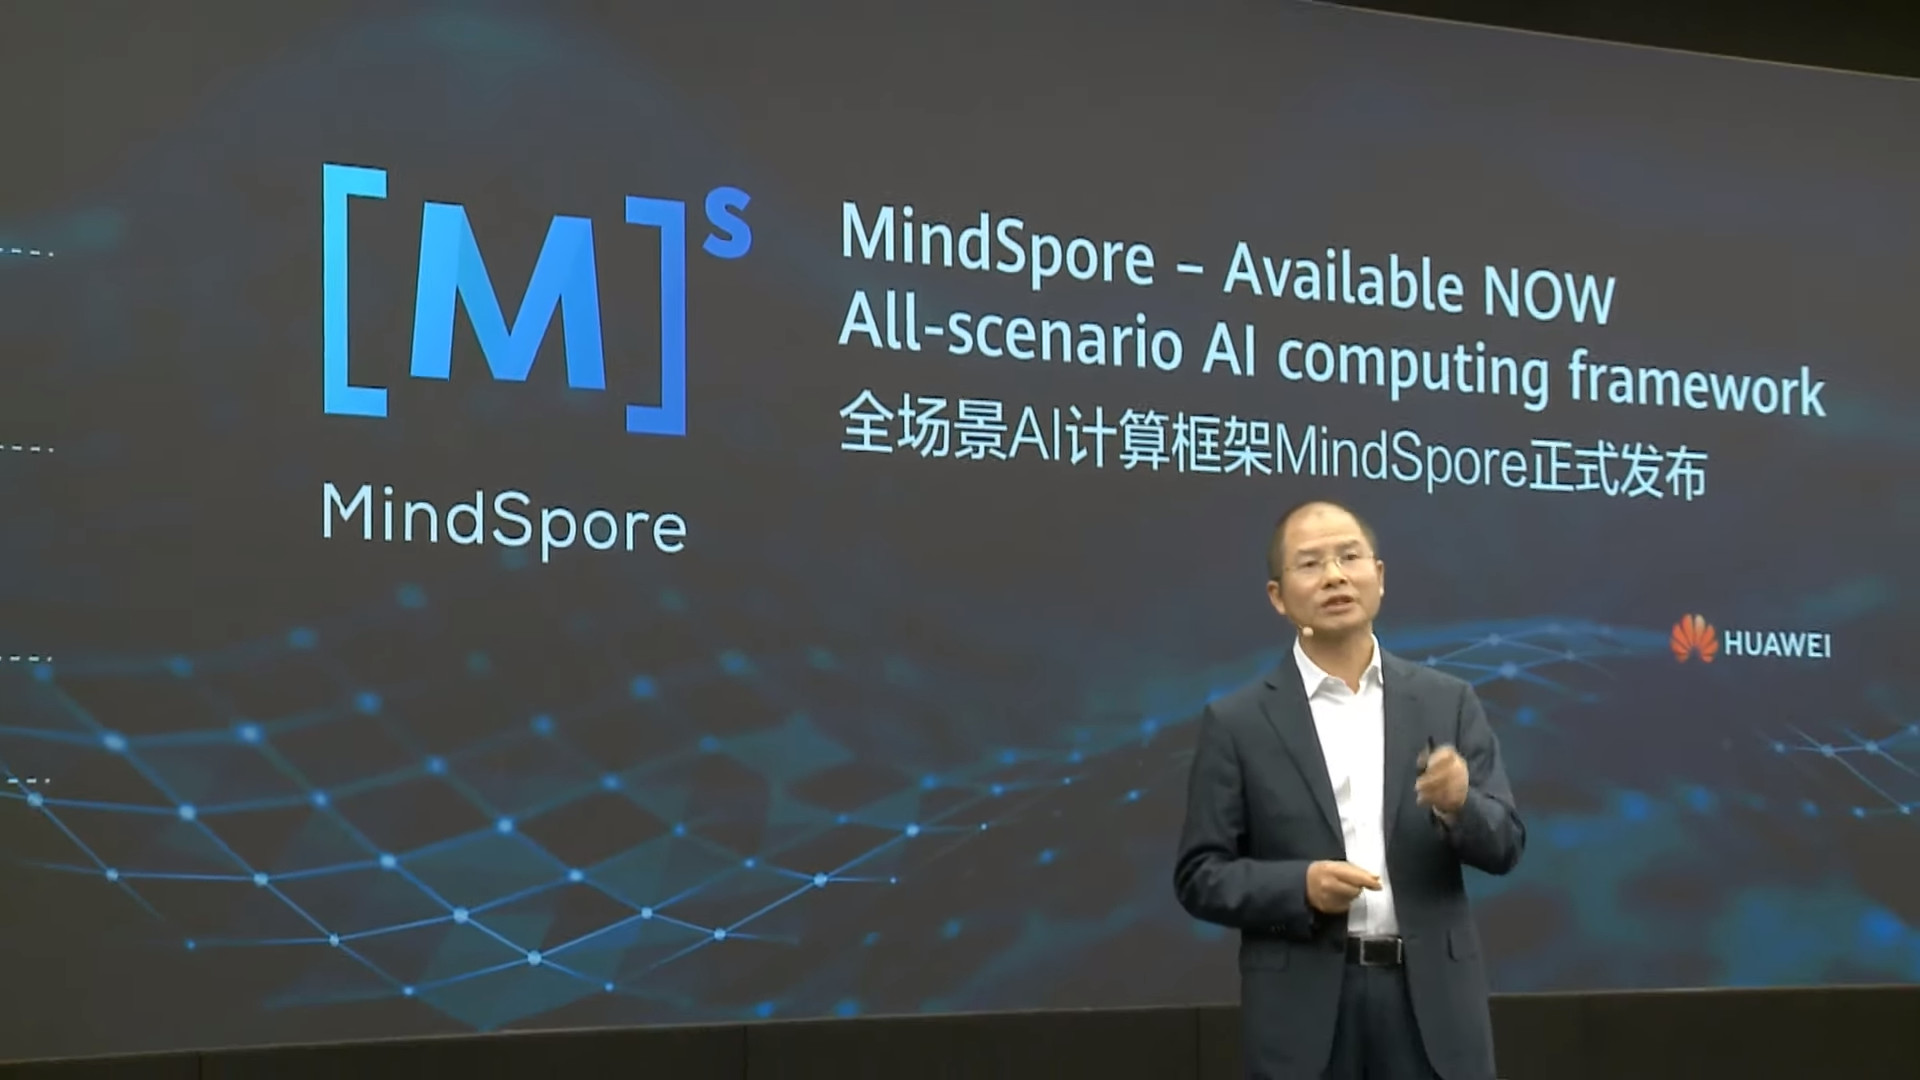 Huawei Ascend 910 Is The World’s Most Powerful AI Processor